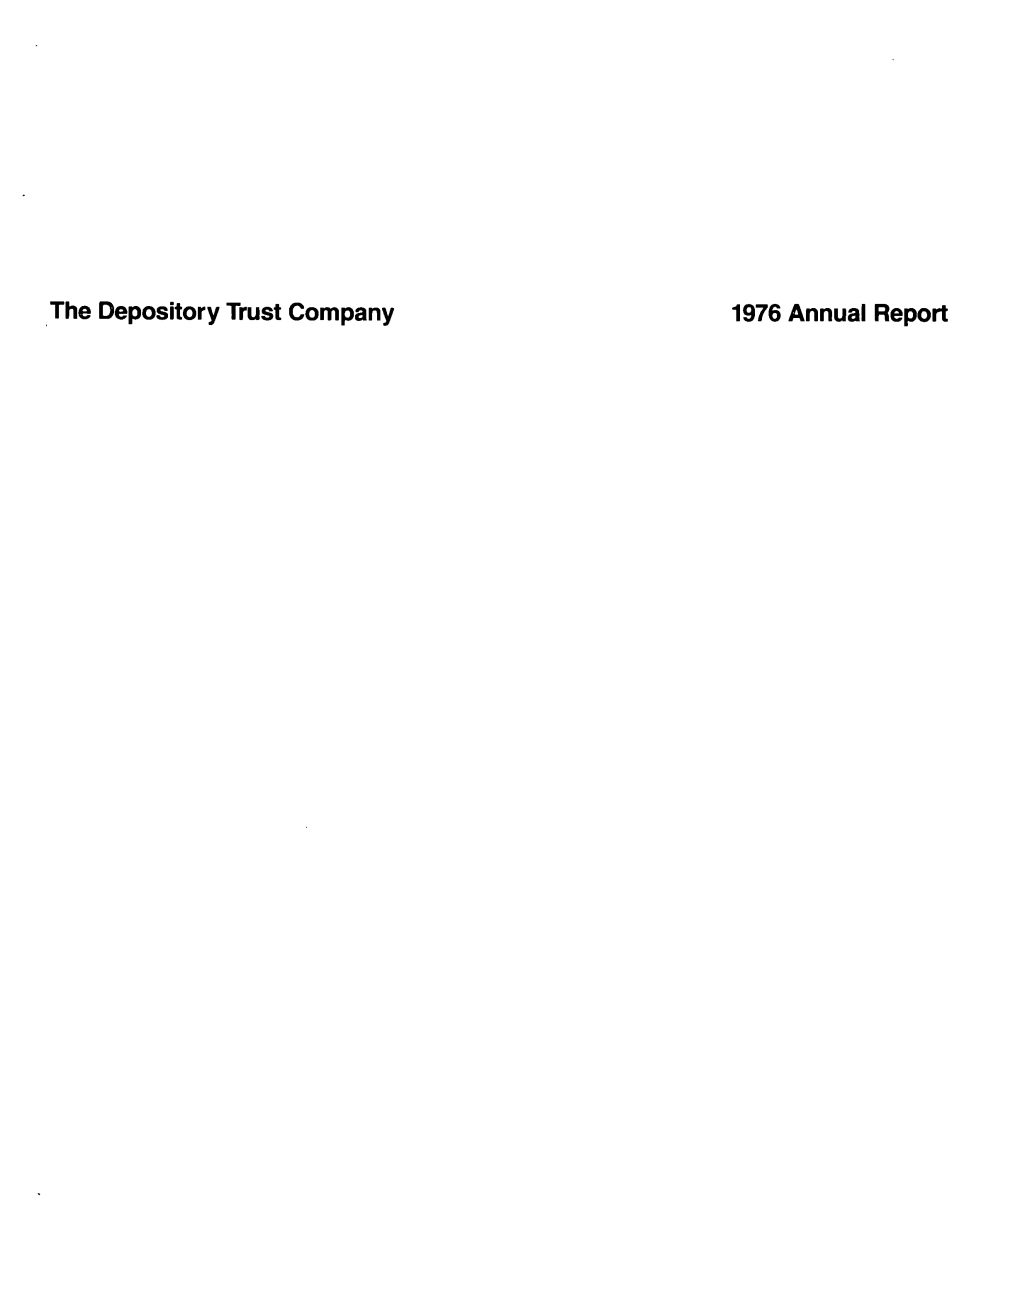 The Depository Trust Company 1976 Annual Report